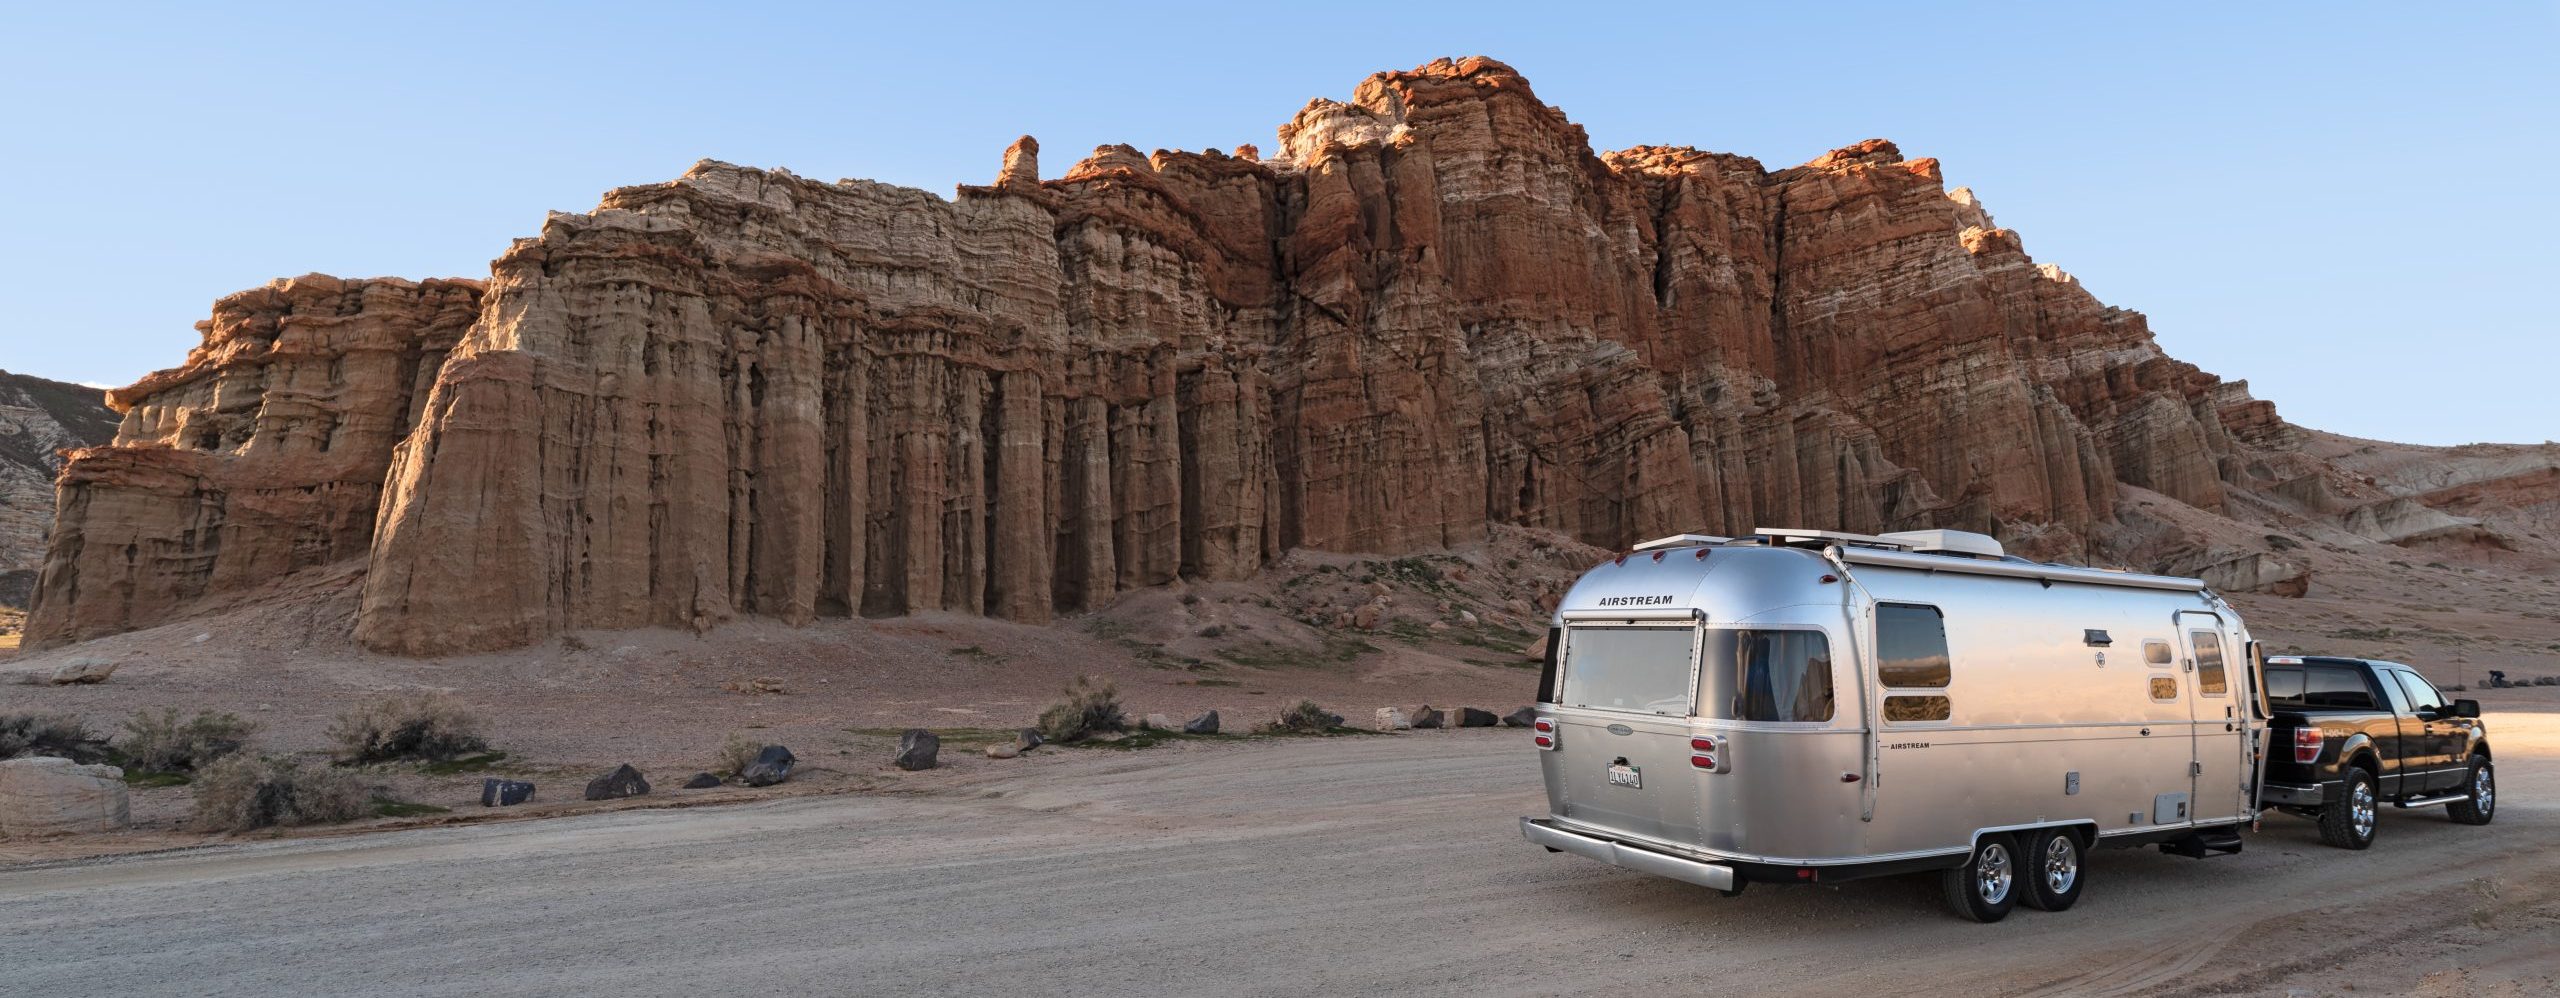 Airstream on the Road